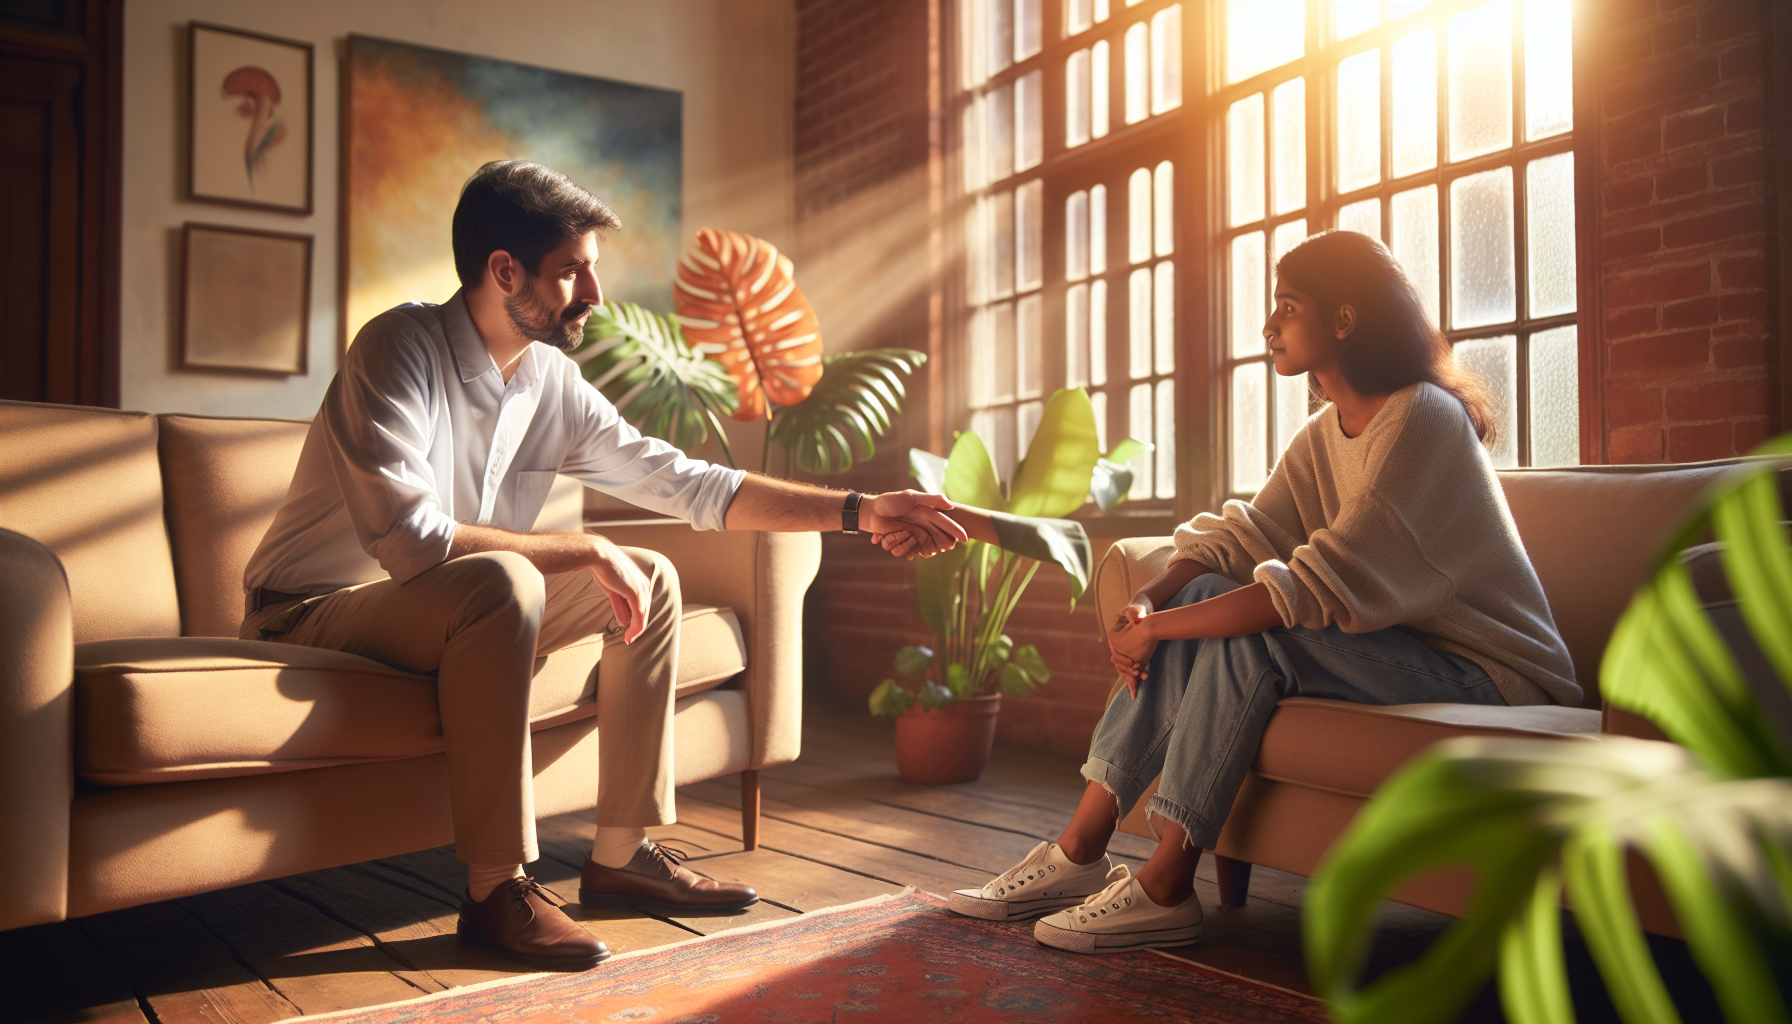 Illustration of a person receiving support in a rehab center